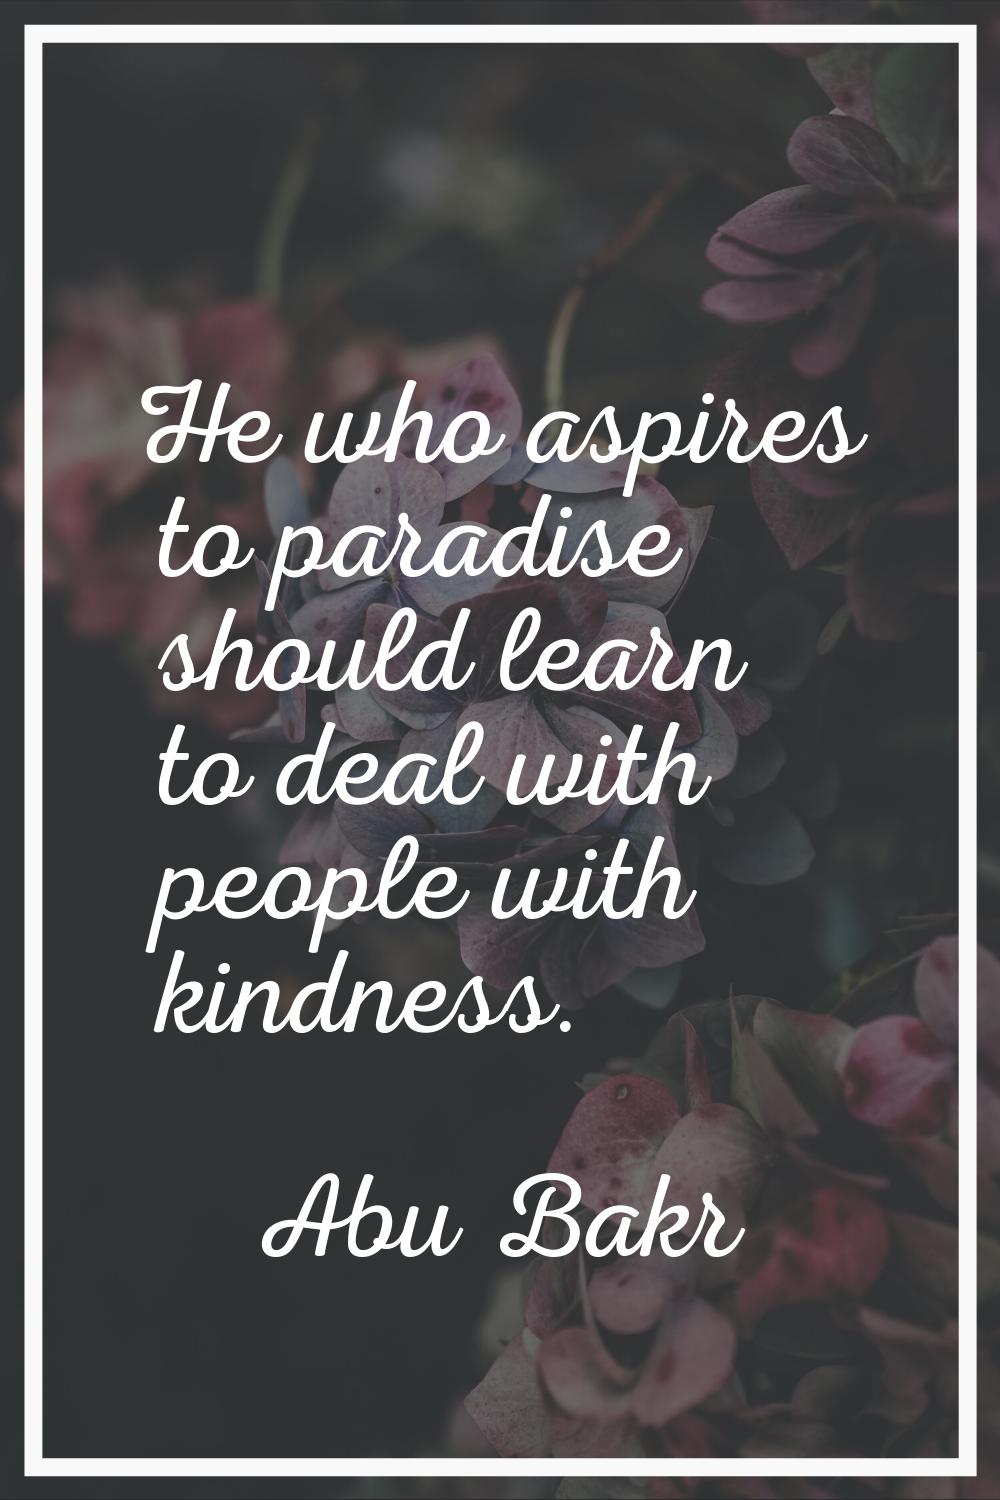 He who aspires to paradise should learn to deal with people with kindness.